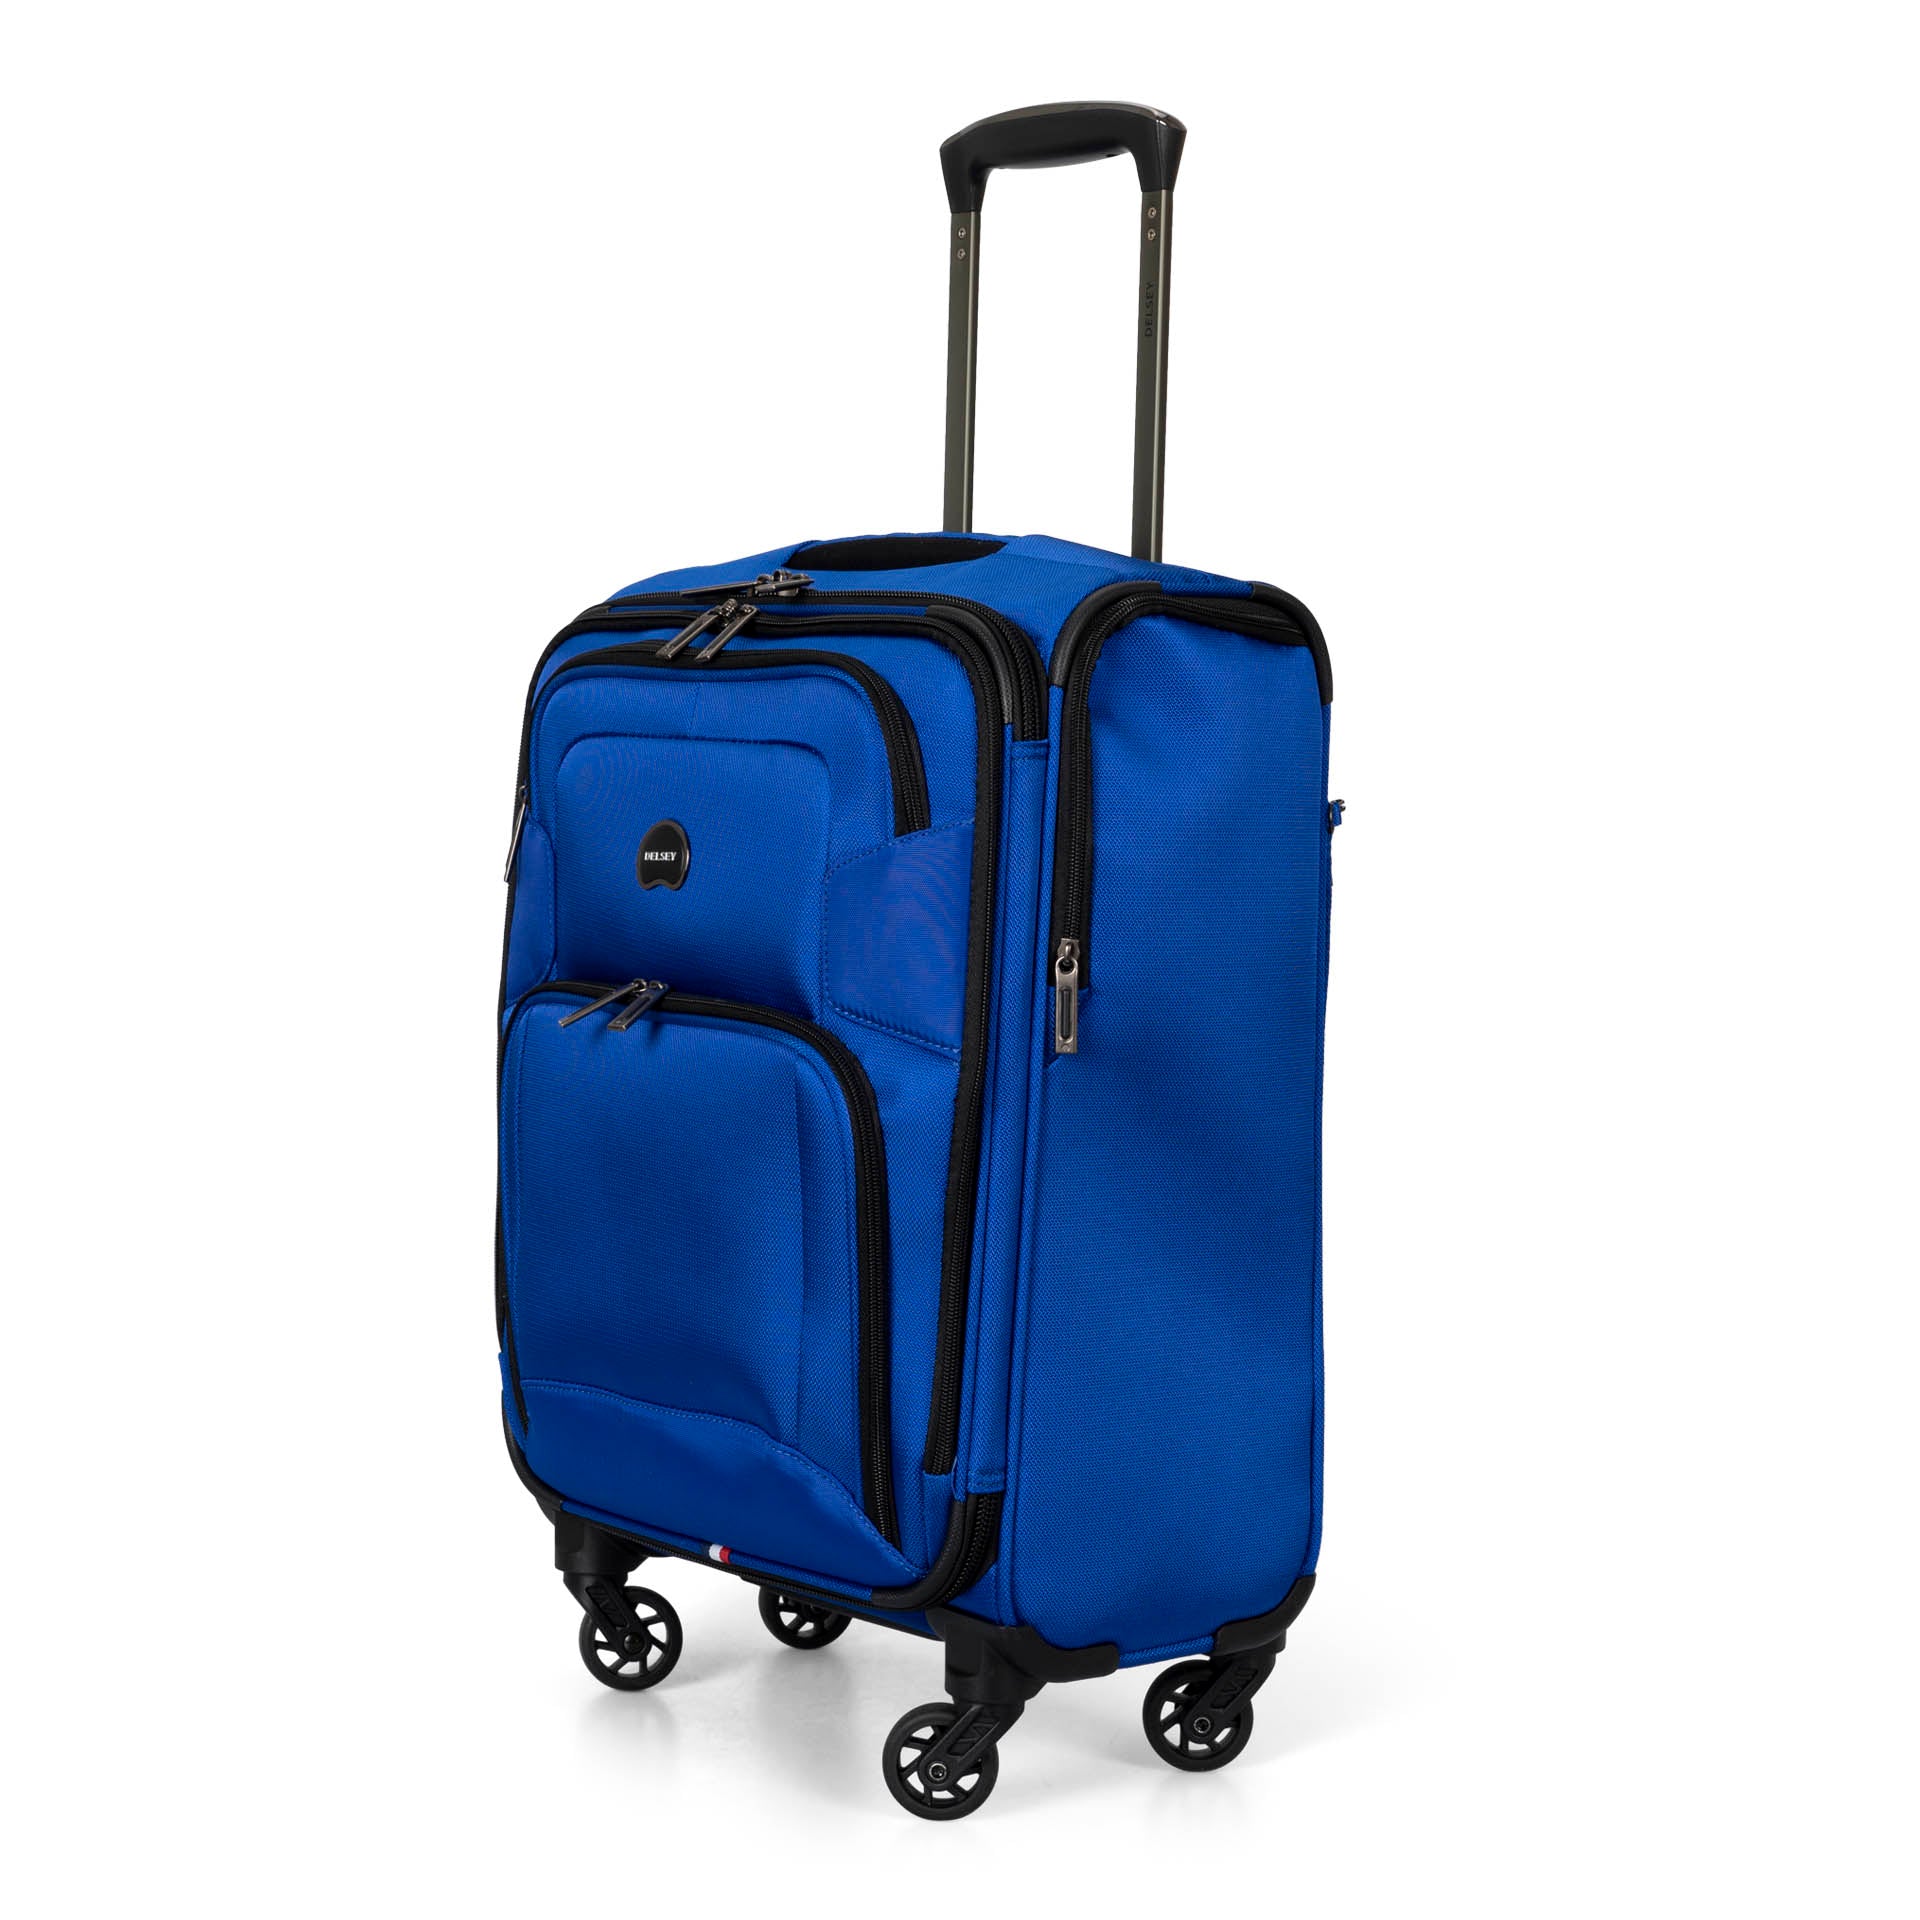 Hinomoto Delsey Air France Trolley Bag, 1, Size: 55cm,~ 22